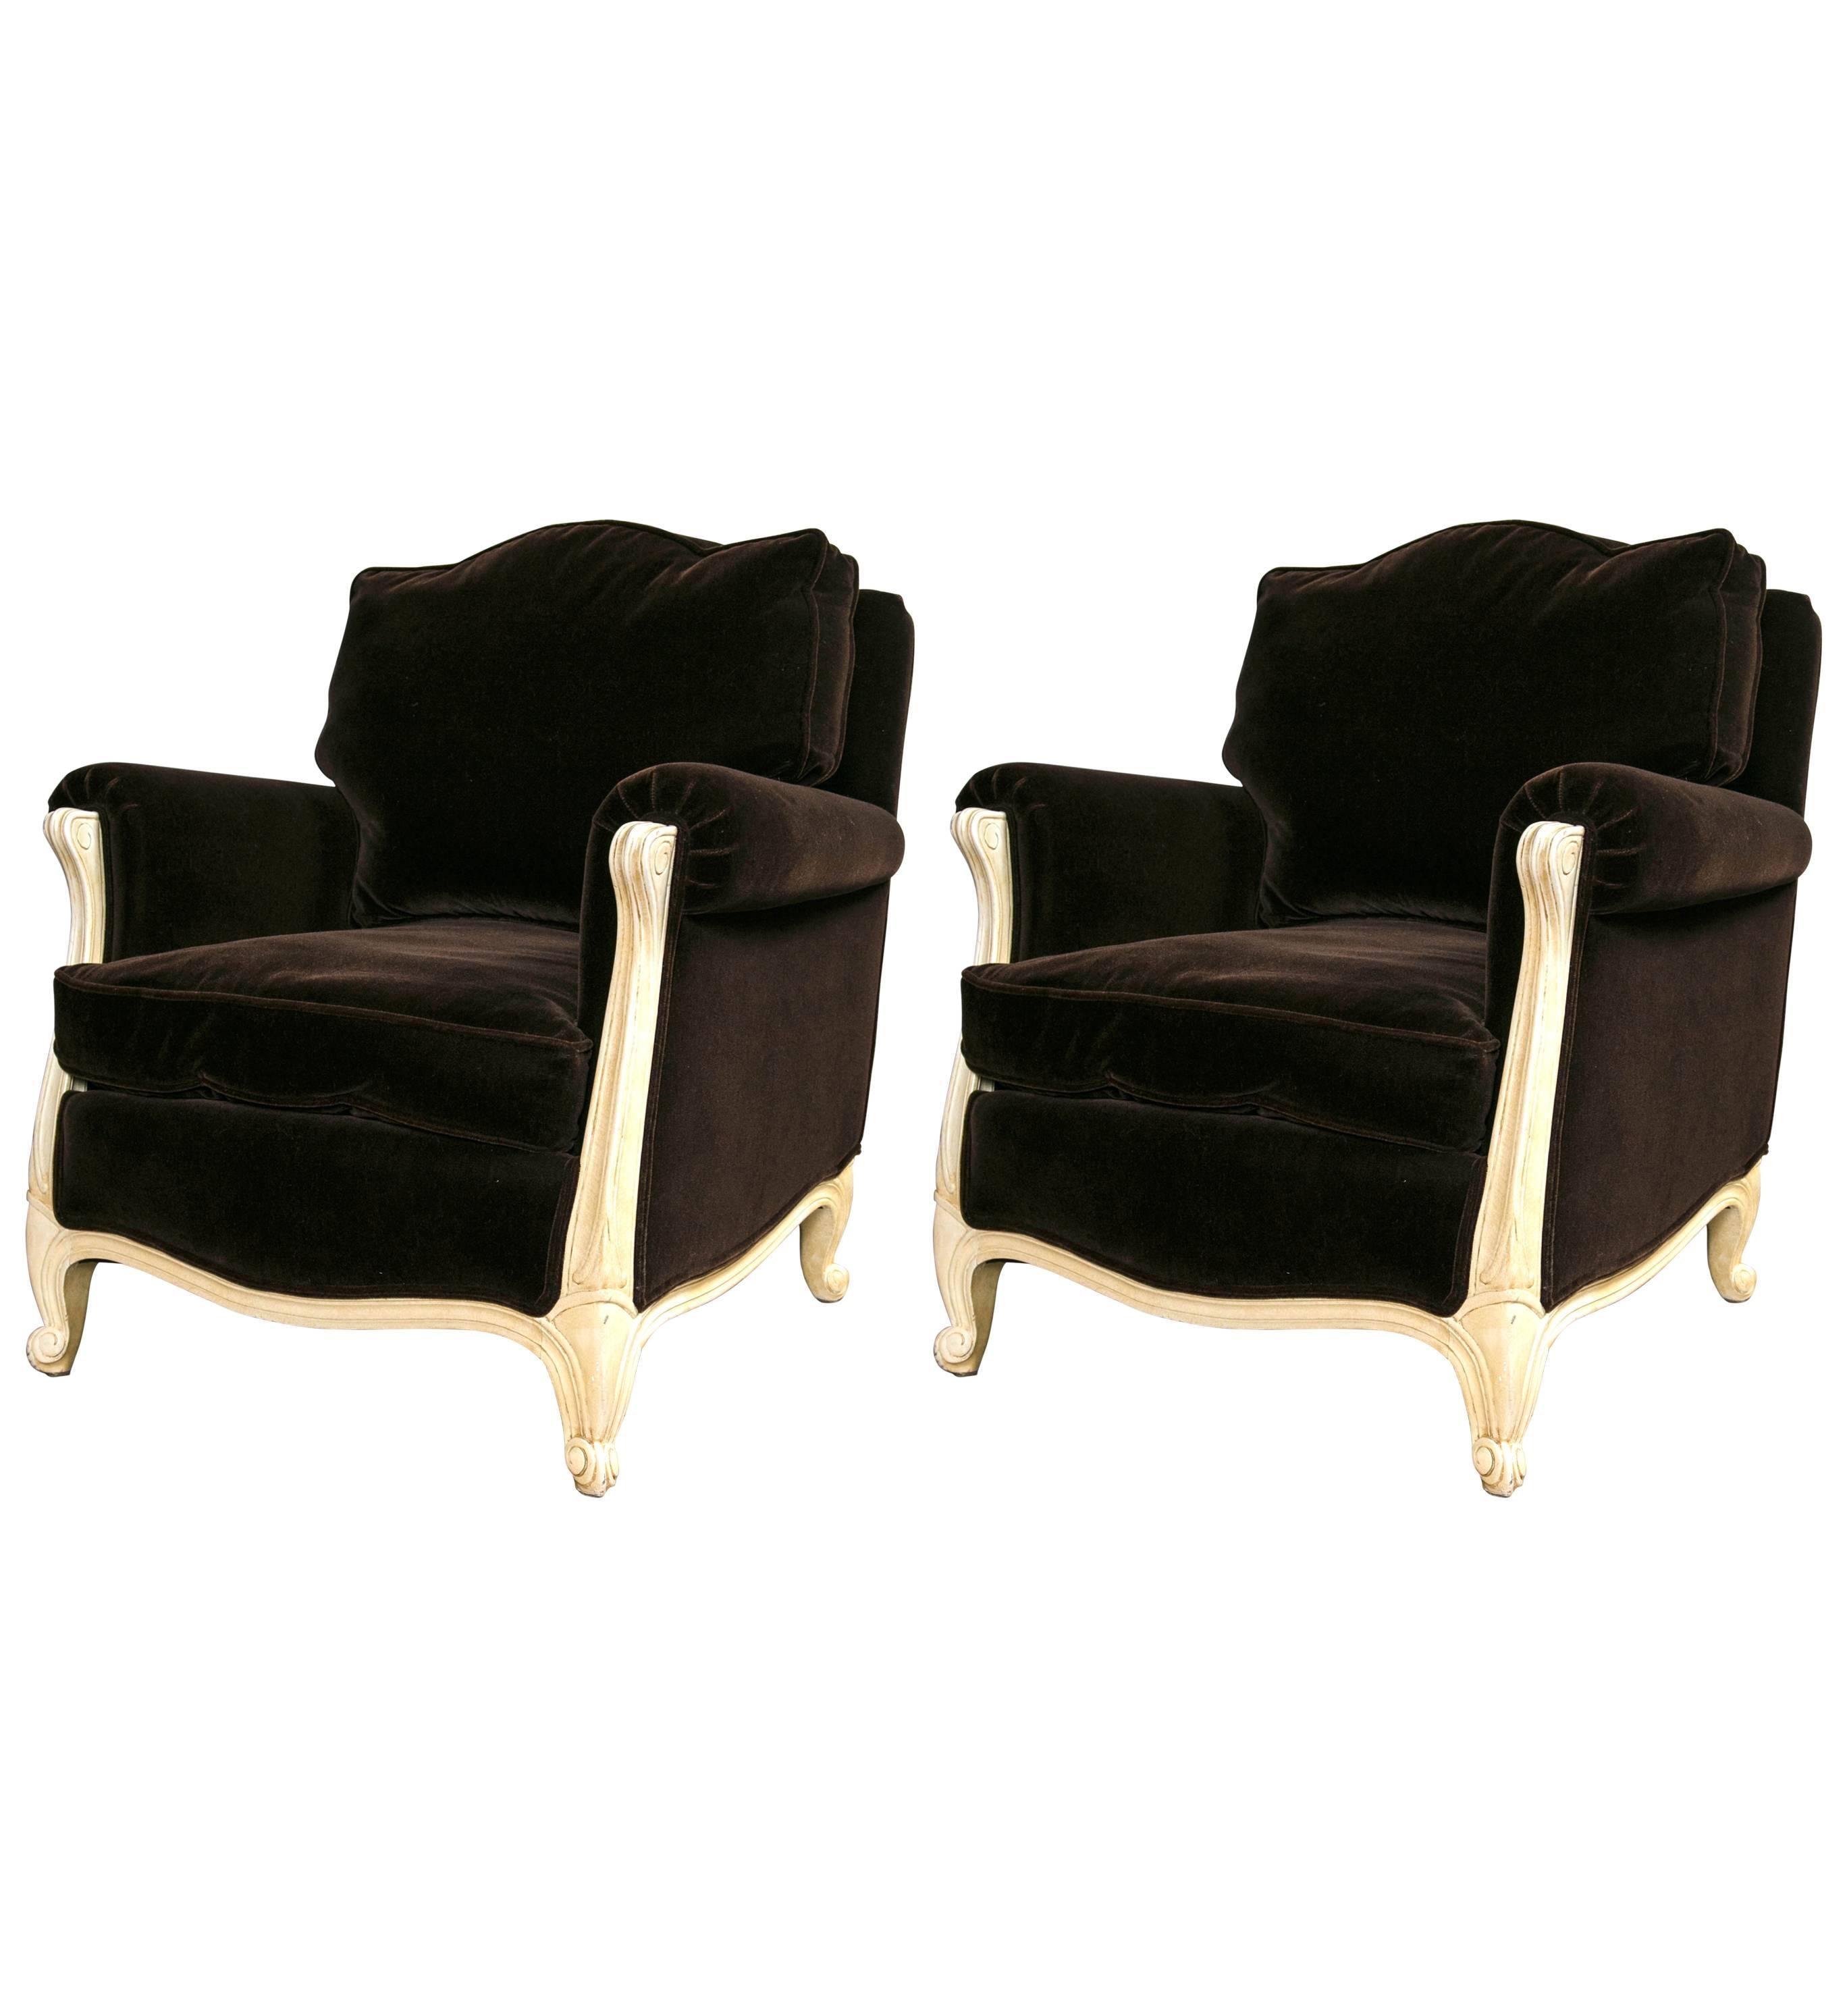 ON SALE NOW! SALE! Pair of  Gorgeous Chocolate Mohair Down Chairs Louis XV Style